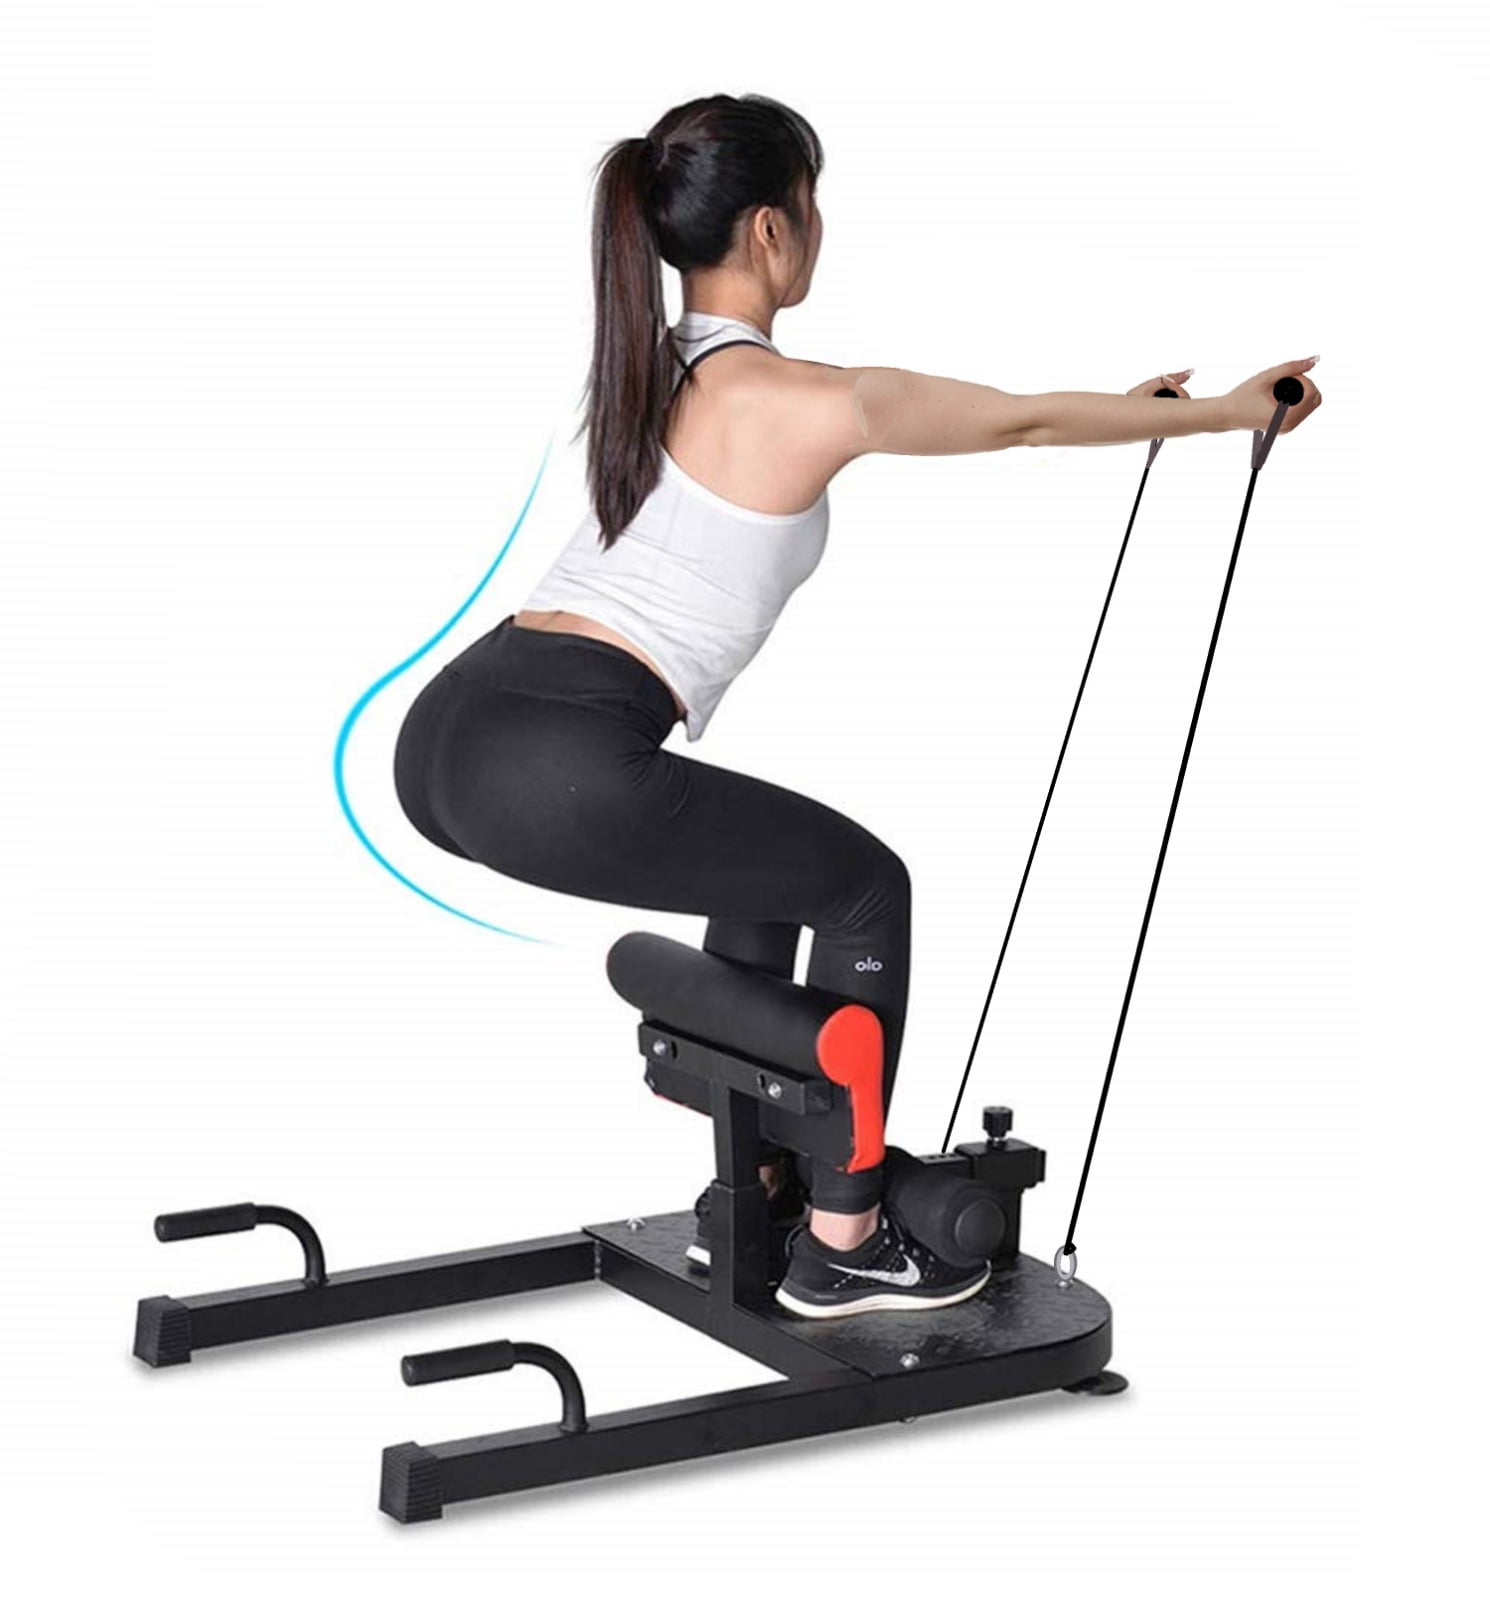 Power Rider Full Body Workout Machine AB Trainer Squat Glutes Core Exercise Gym 